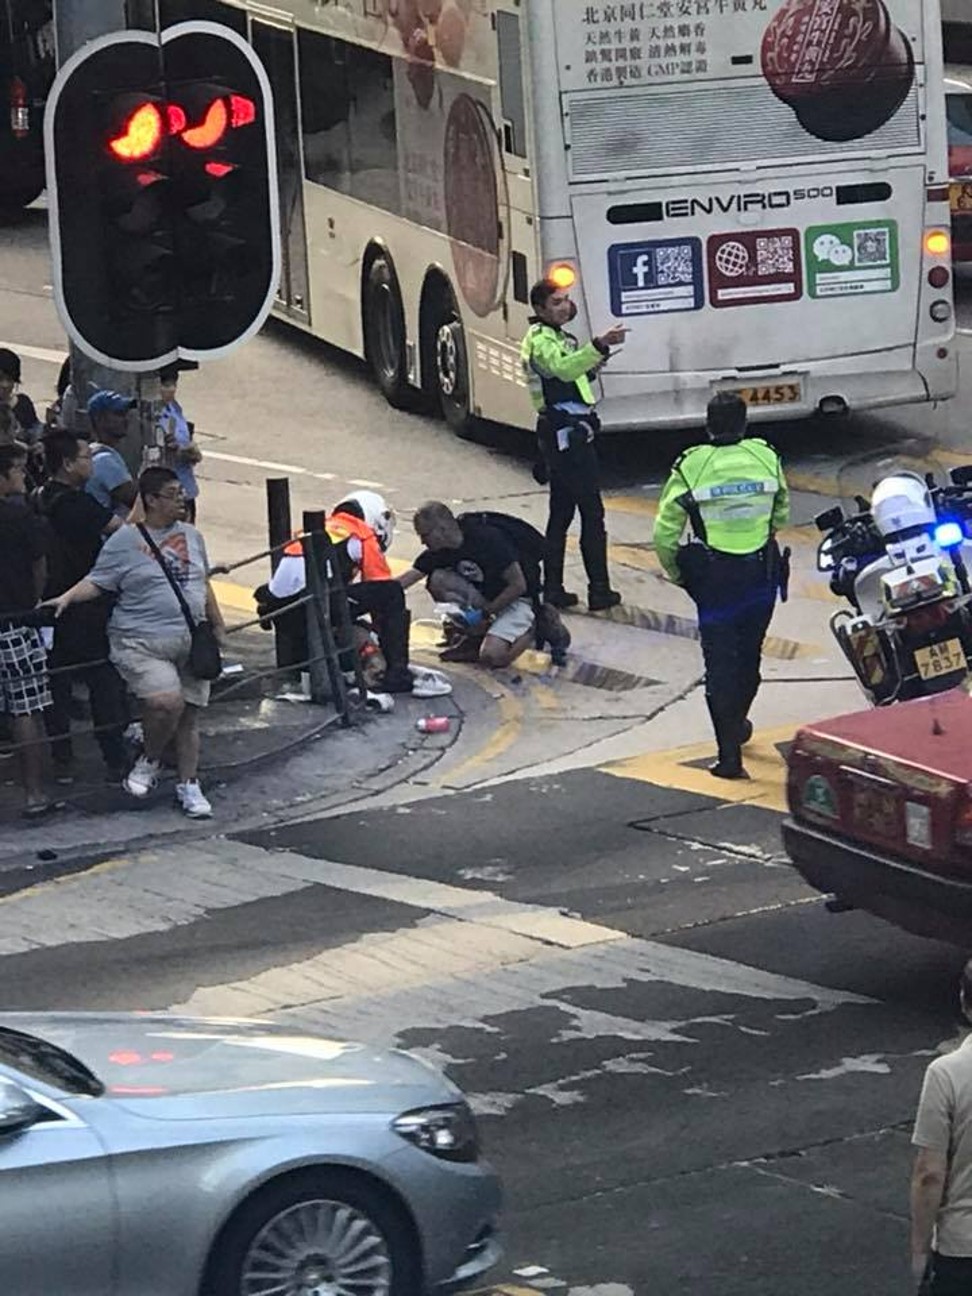 Police on the scene after the incident in November 2017. Photo: Handout